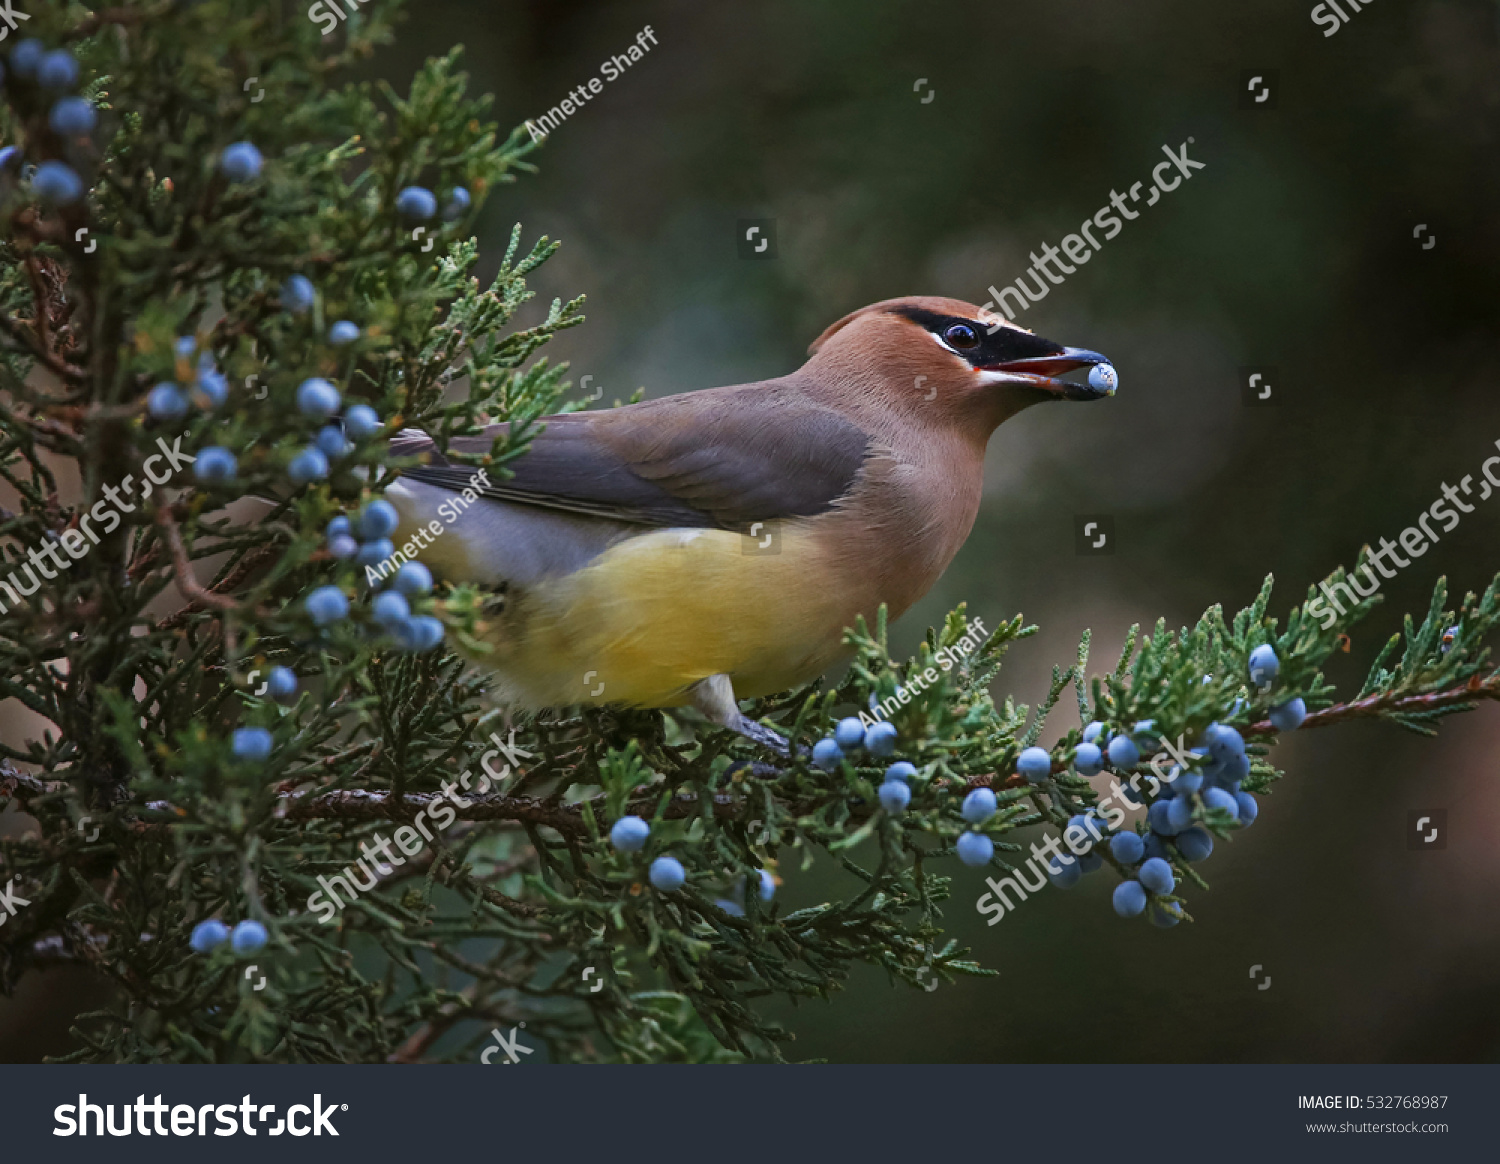 a cedar waxwing eating a blue berry off an evergreen tree in the winter time at twilight  #532768987